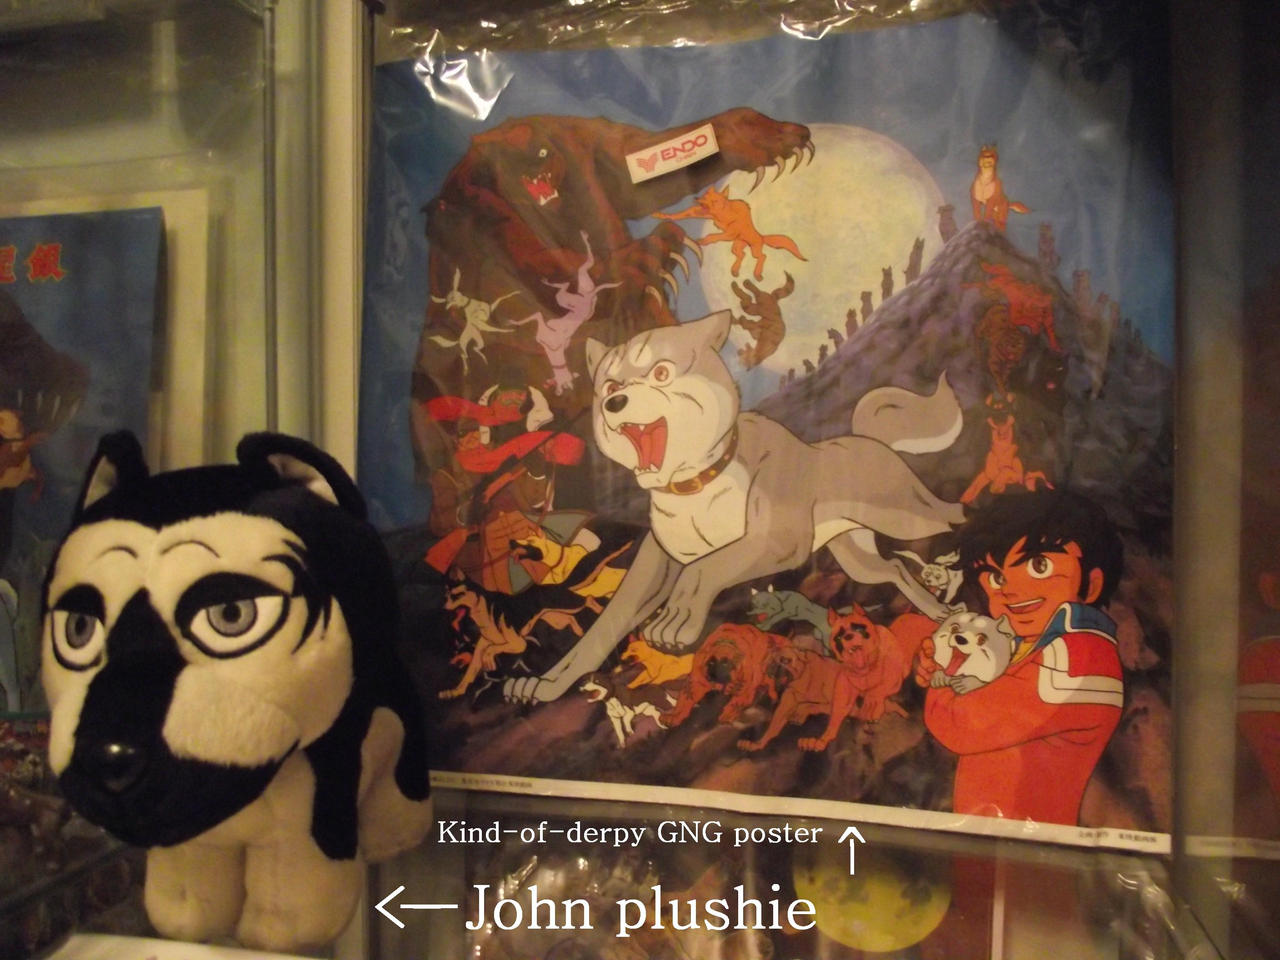 John plushie and kind-of-derpy GNG poster